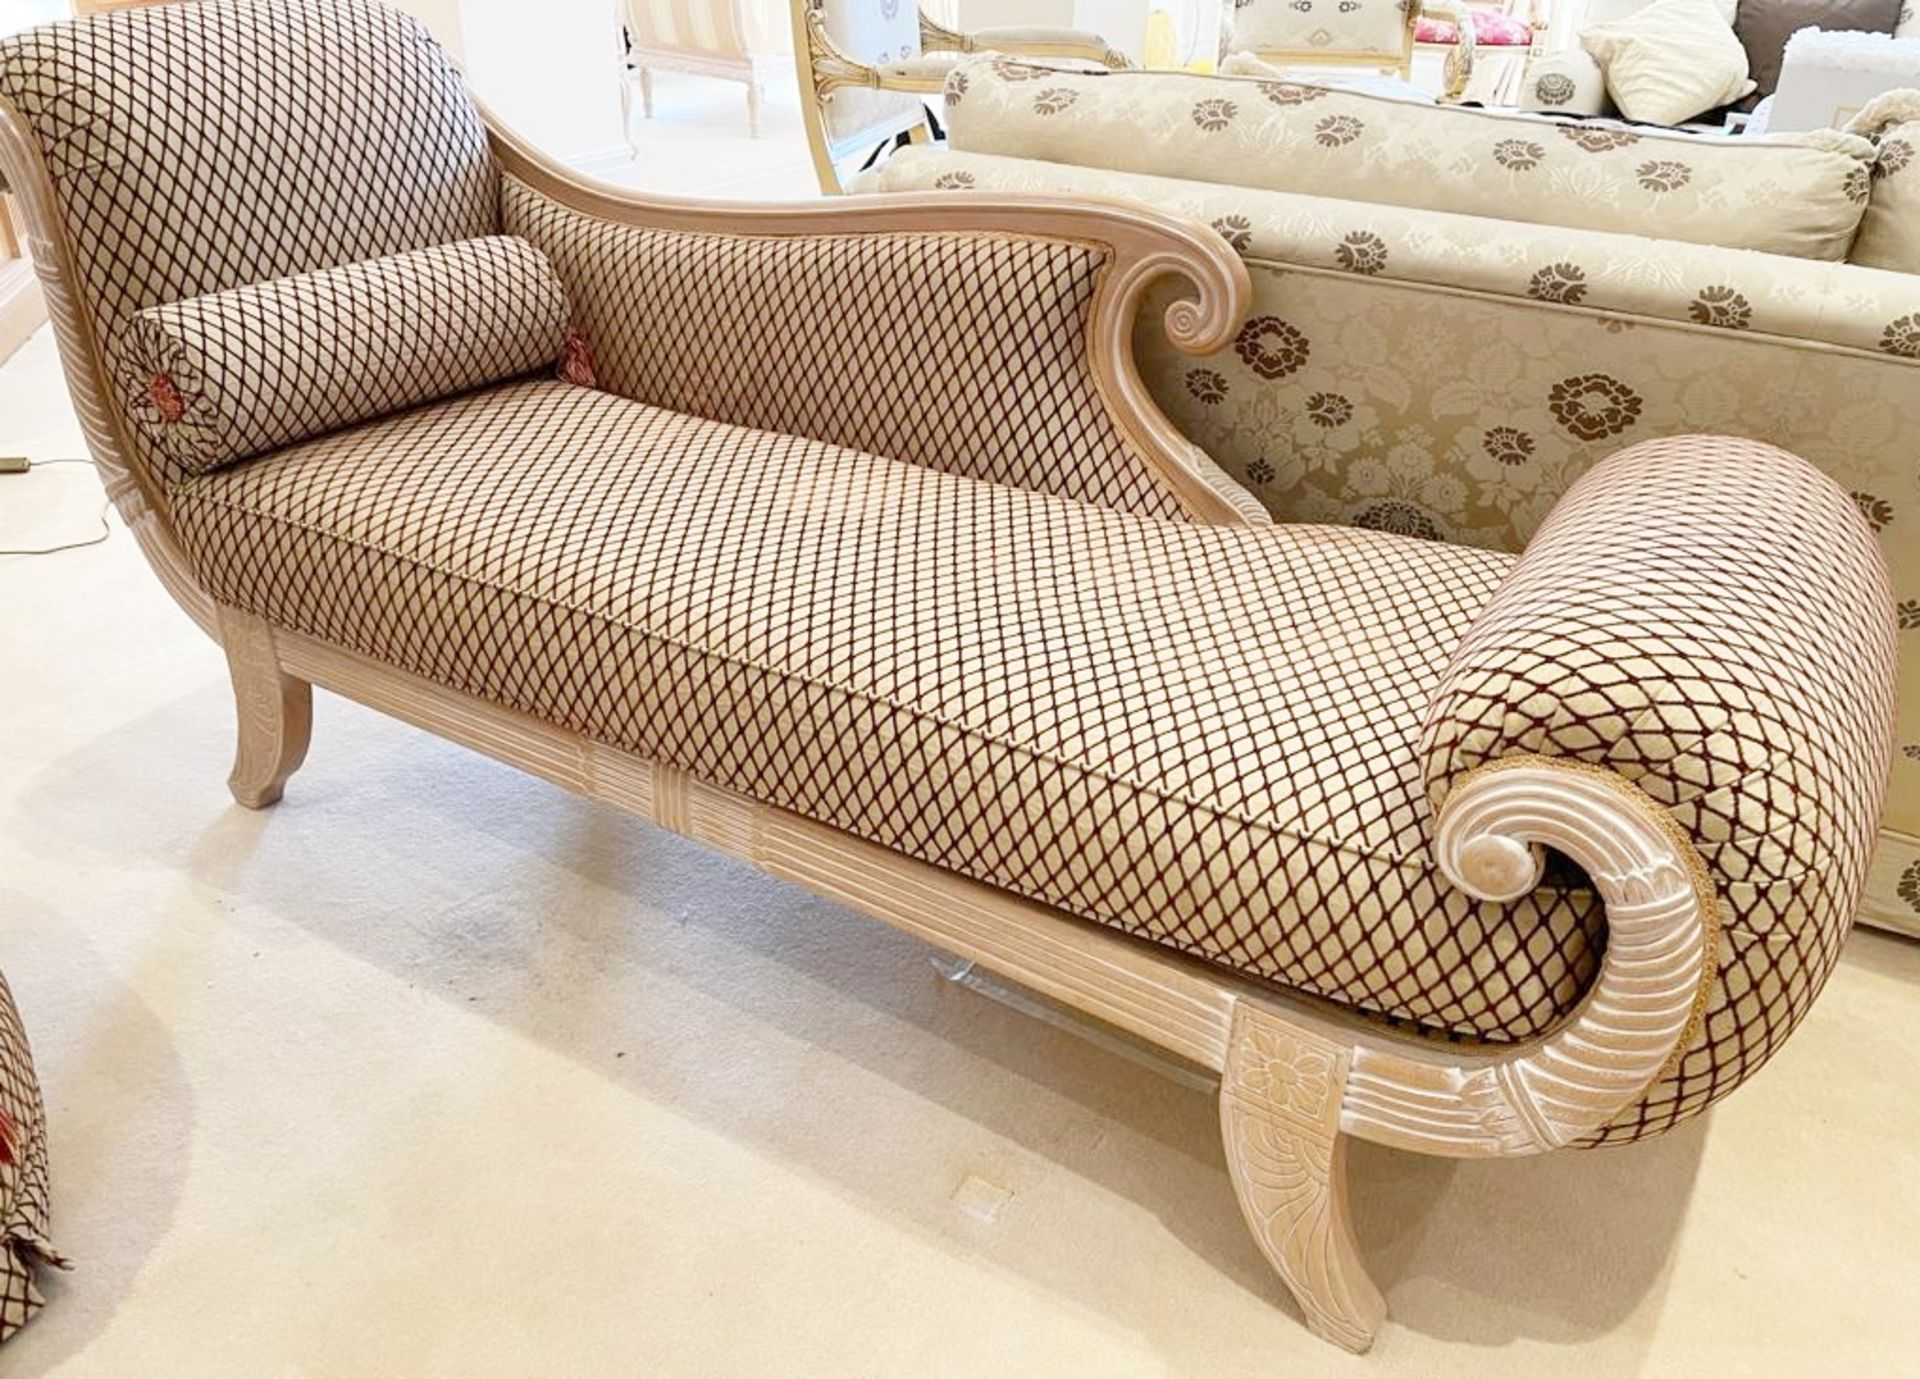 1 x Elegant Chaise Longue Sofa With Carved Wooden Frame, Scroll End and Diamond  Pattern Fabric - NO